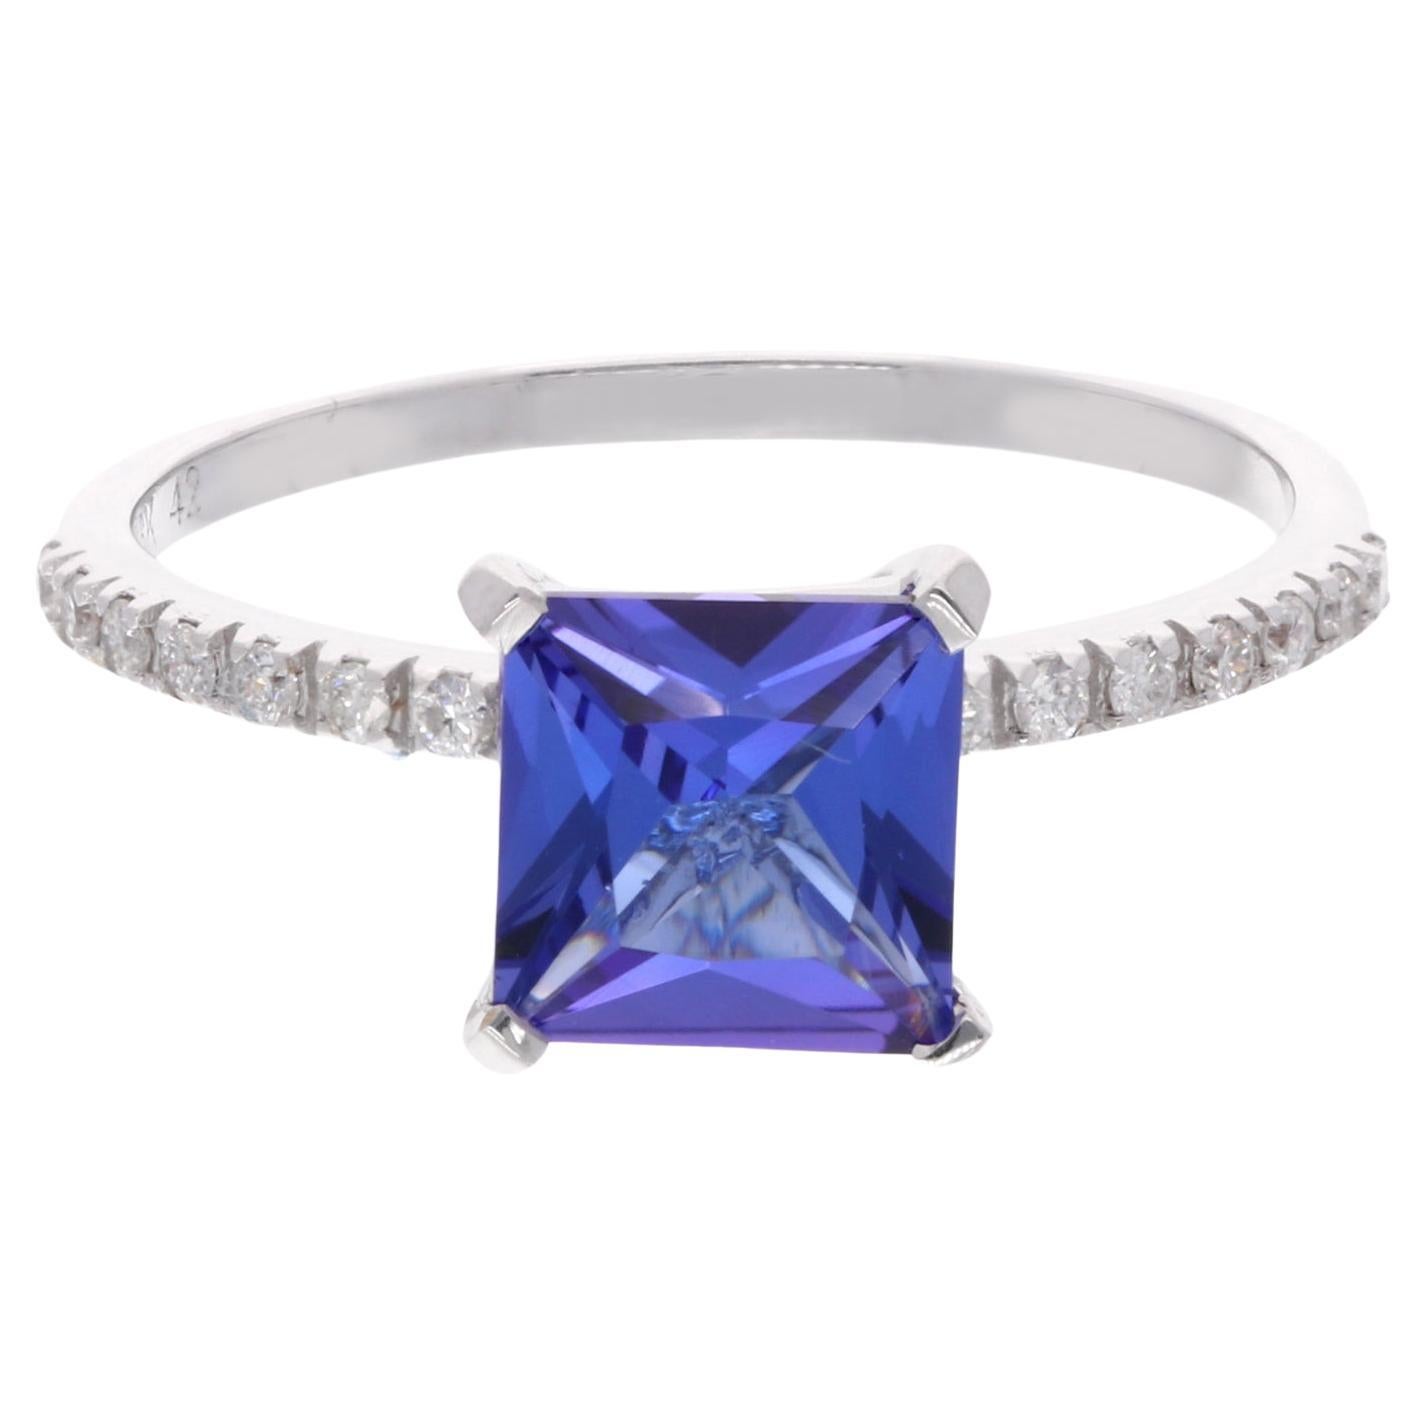 Solitaire Square Tanzanite Gemstone Wedding Band Ring Diamond 18 Kt White Gold For Sale